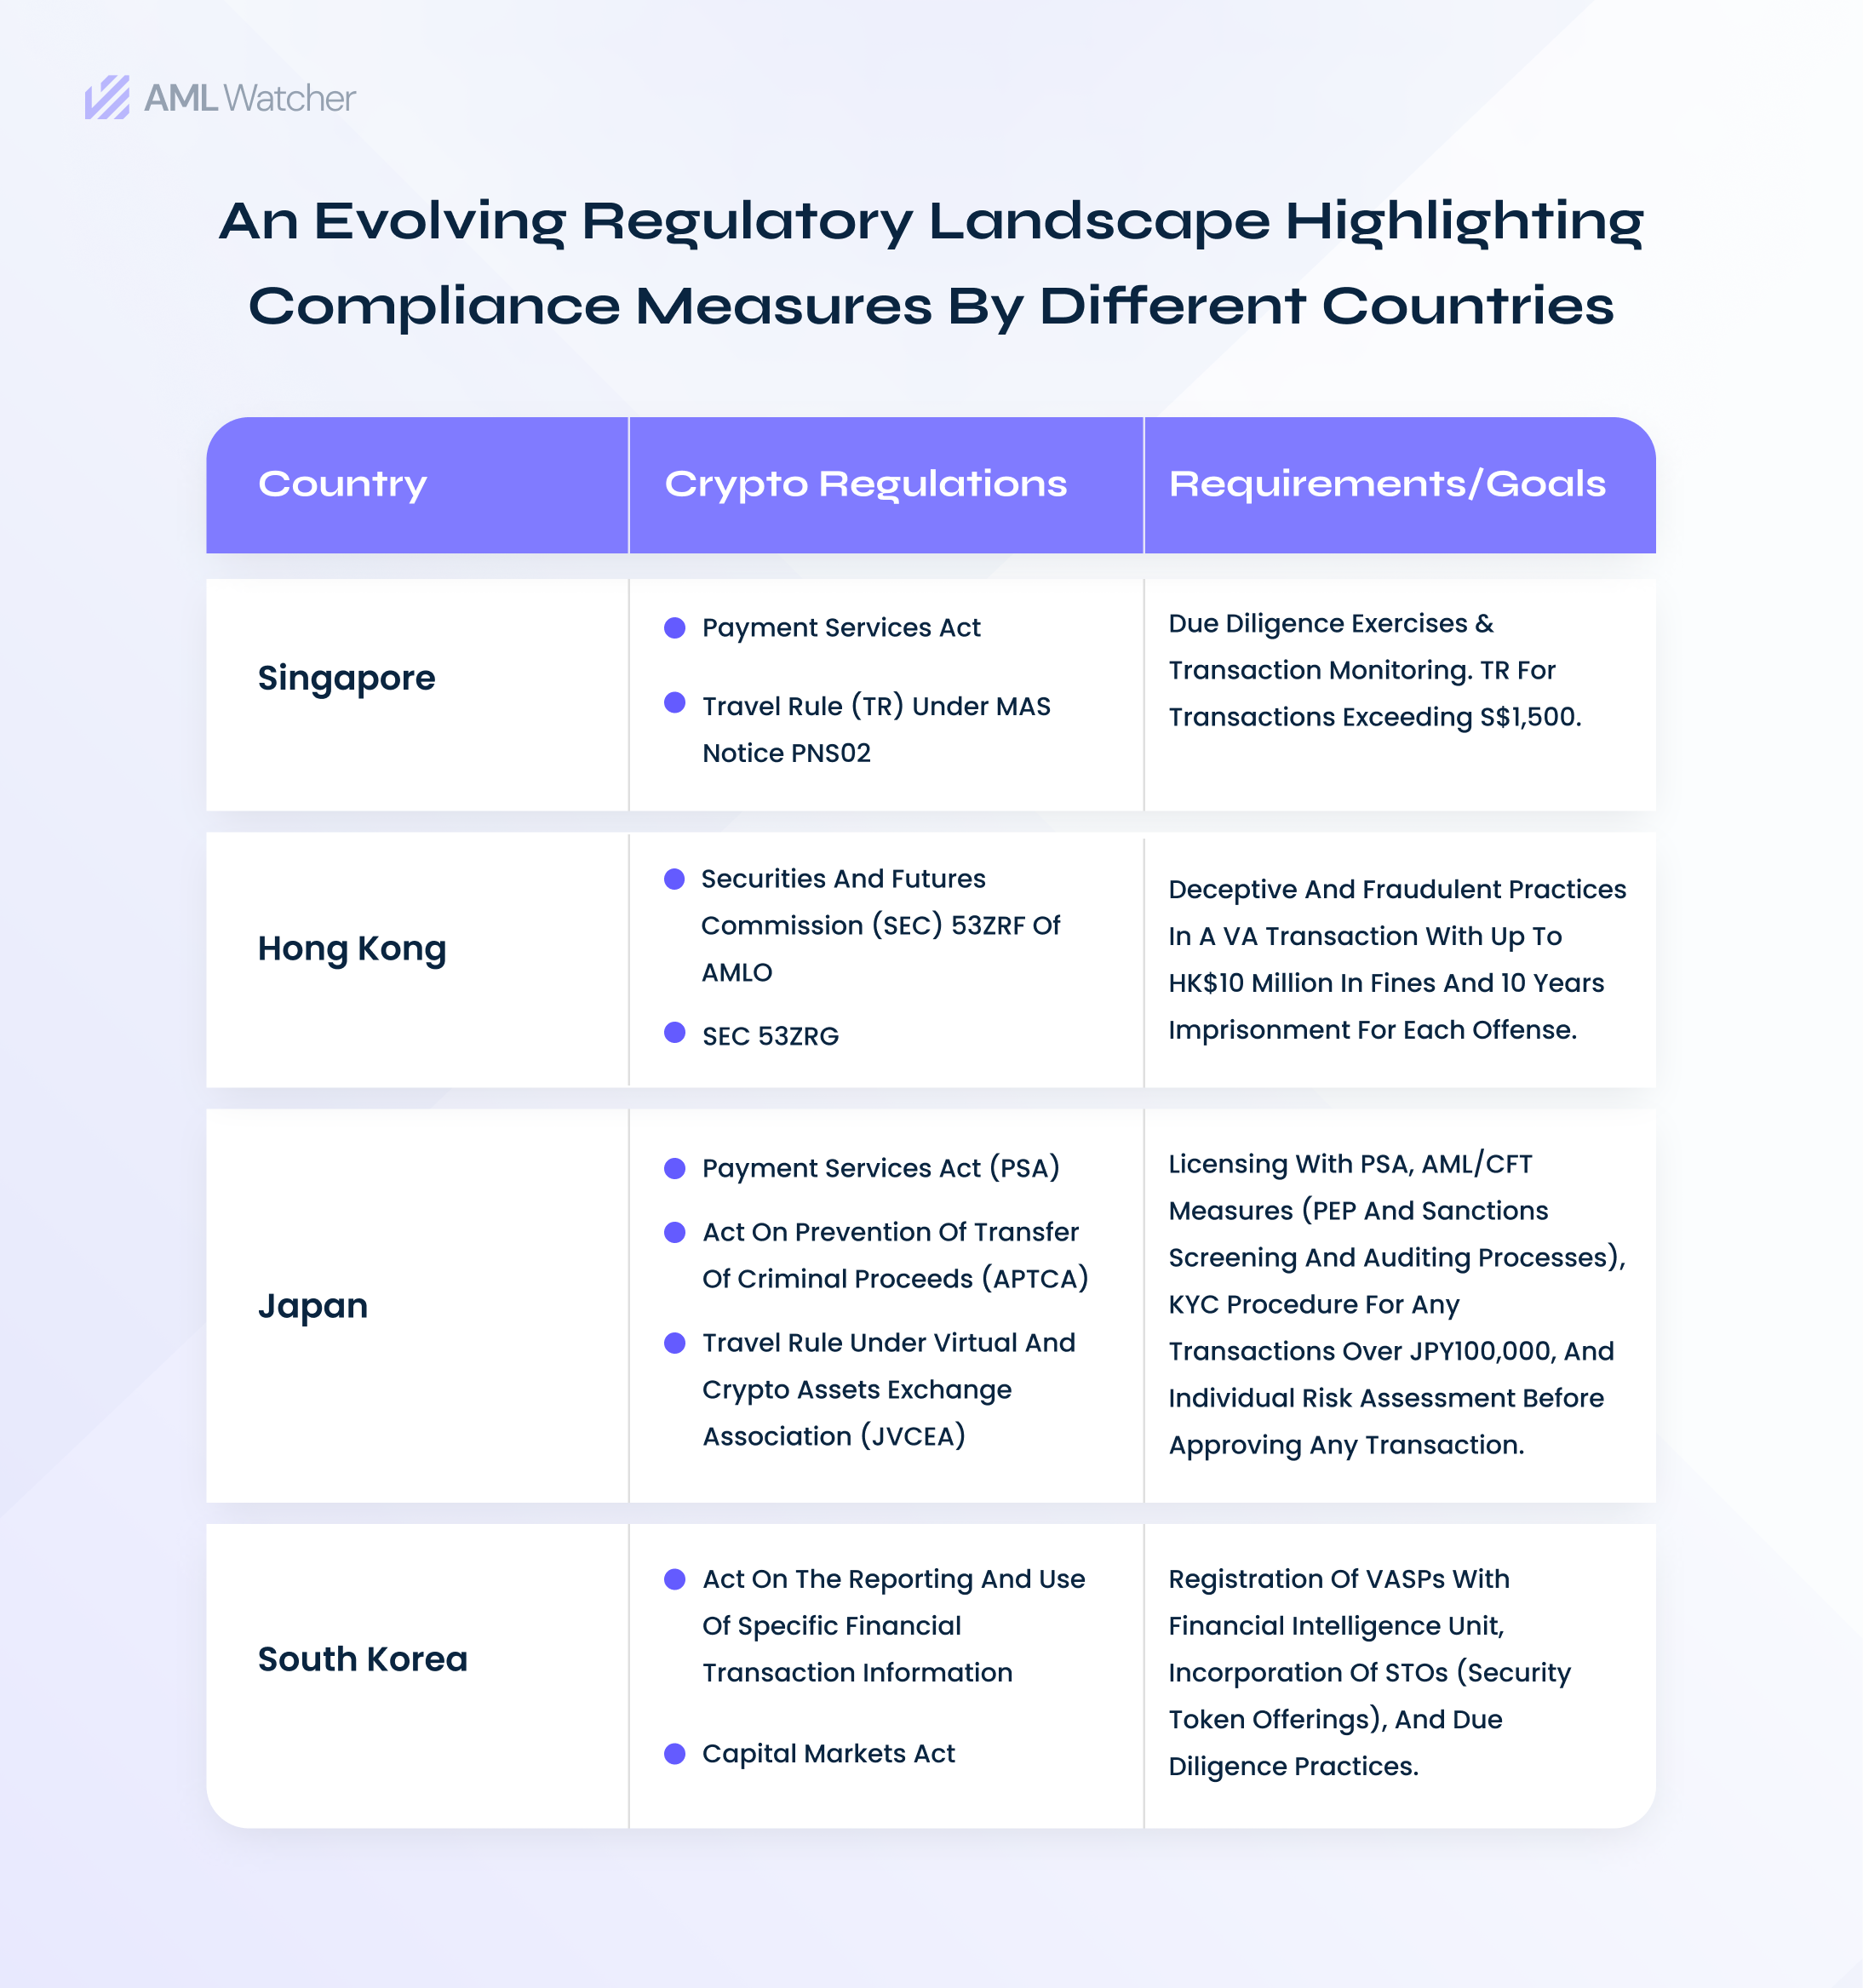 The featured table highlights compliance measures undertaken by various countries and the subsequent requirements of AML crypto compliance